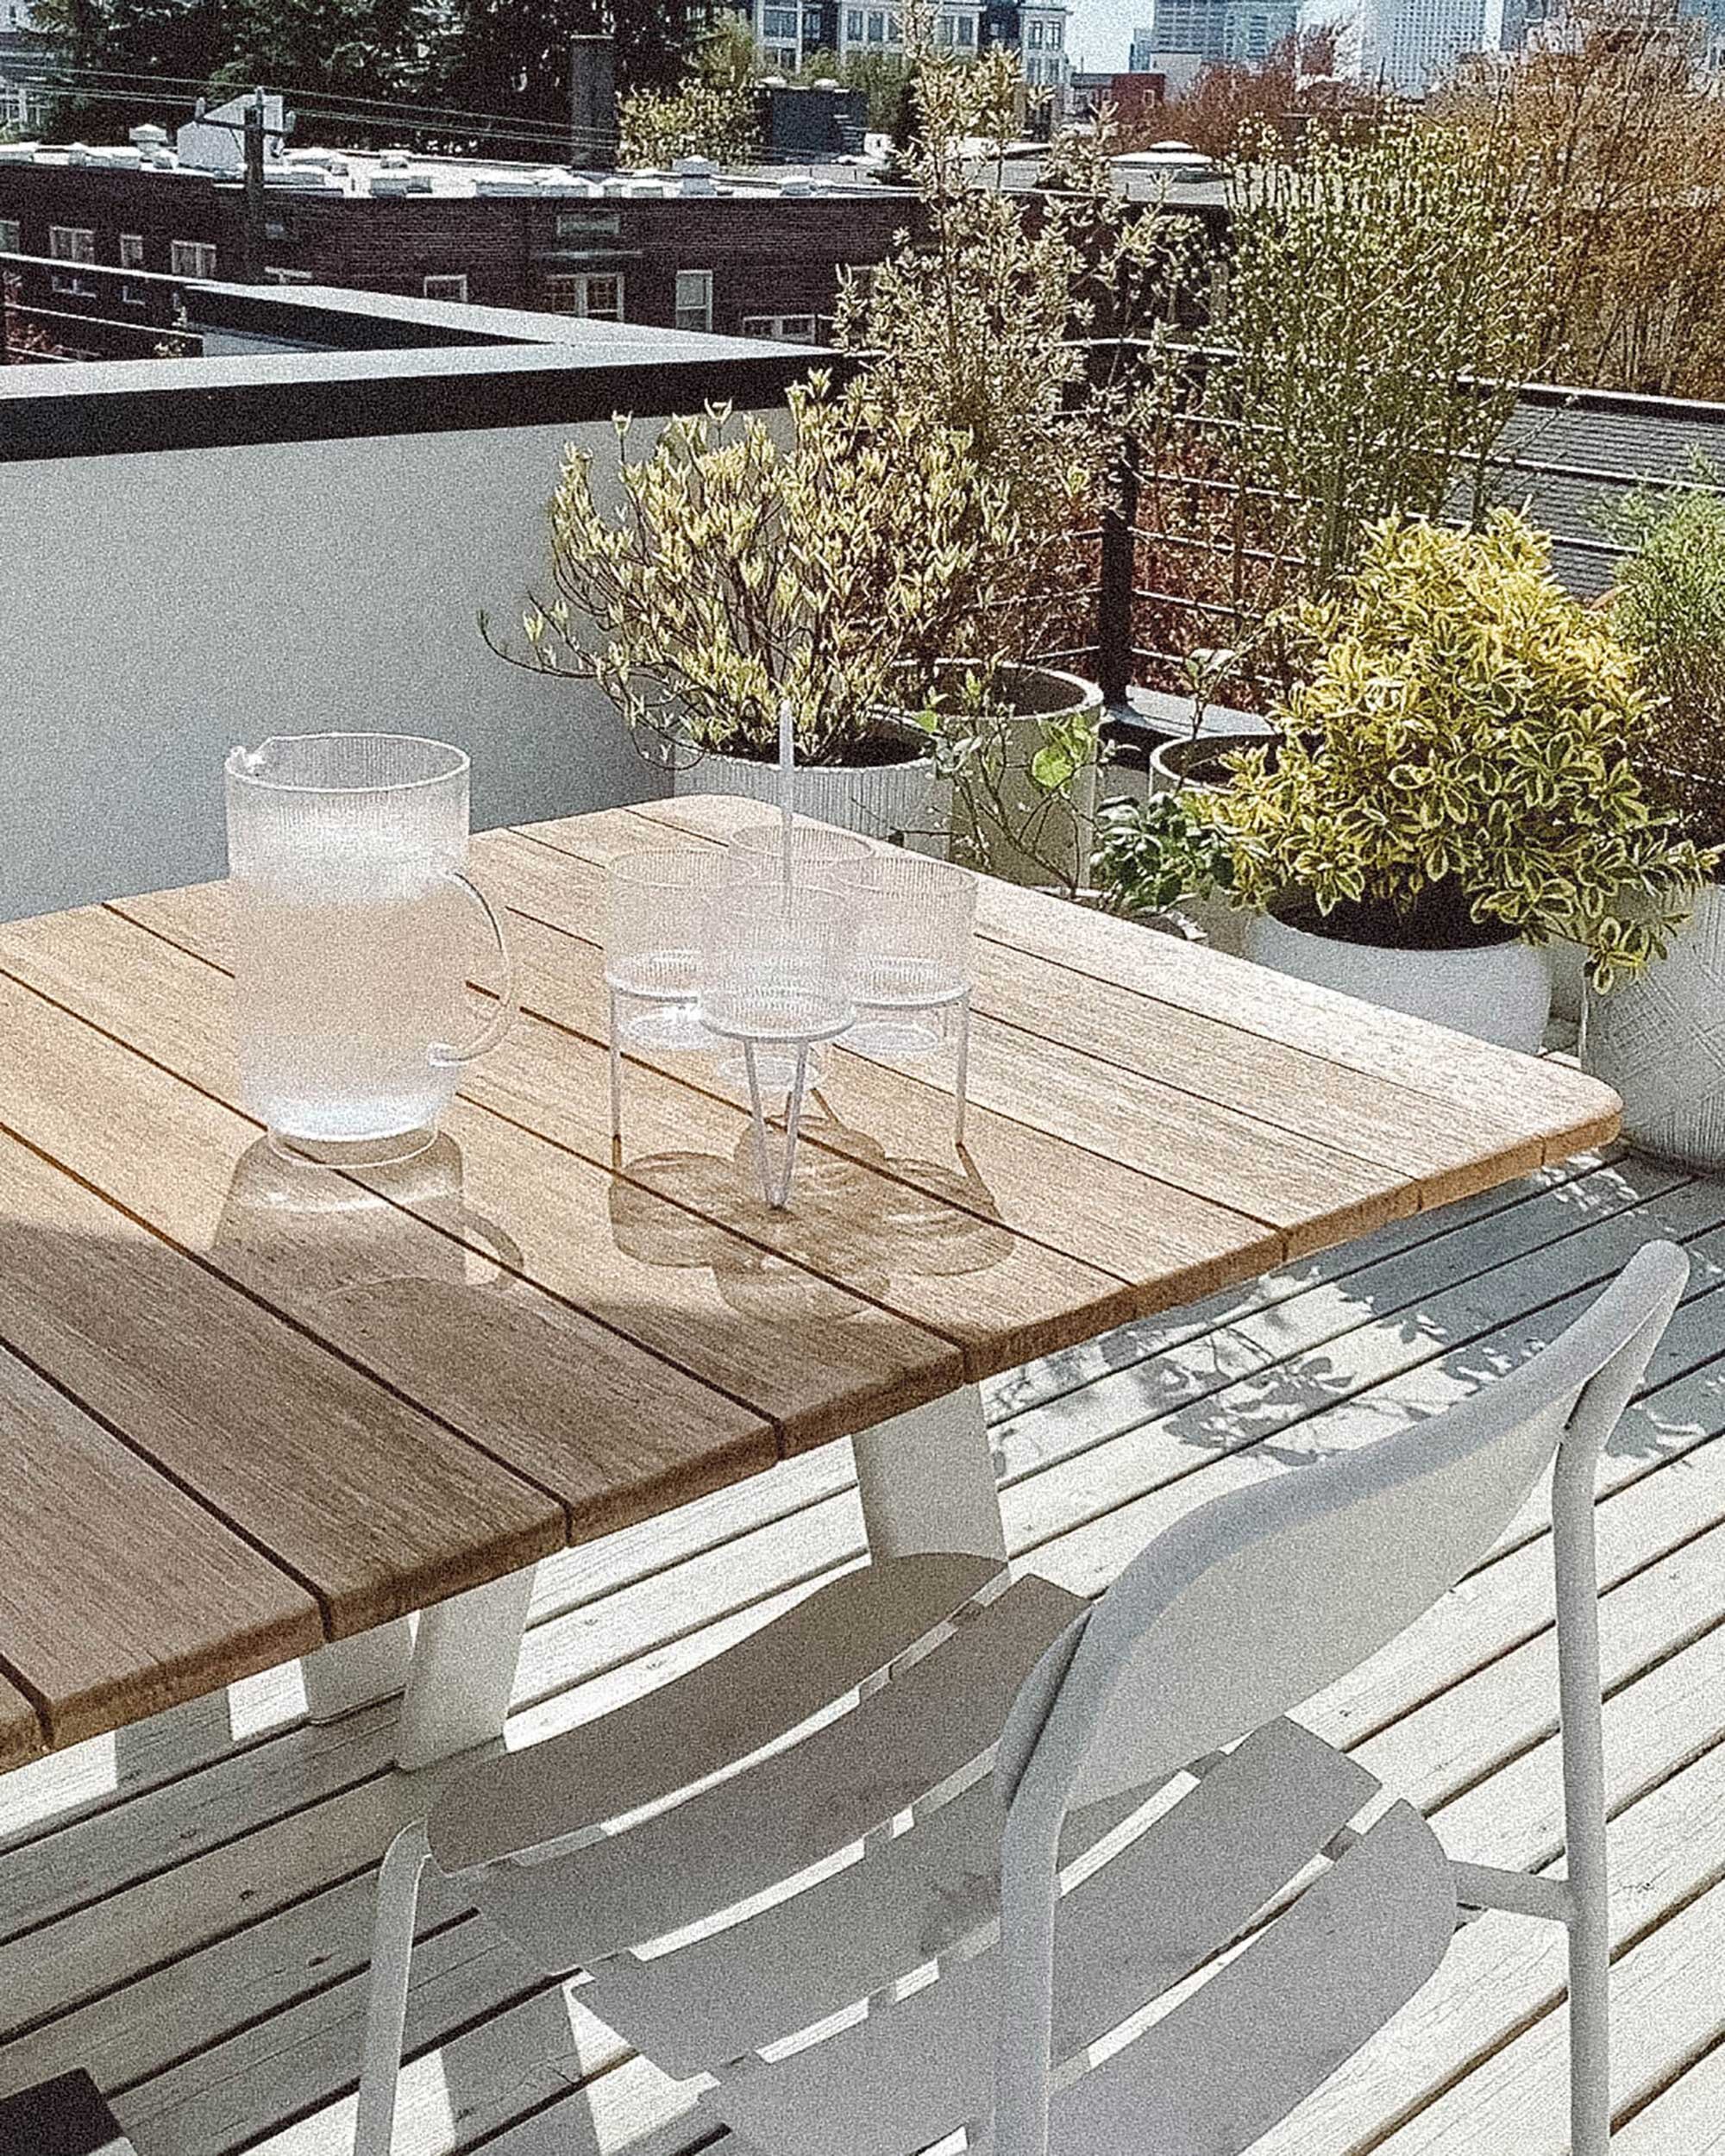 West Elm Summer Rooftop Patio Deck with outdoor dining furniture for entertaining al fresco-1.jpg